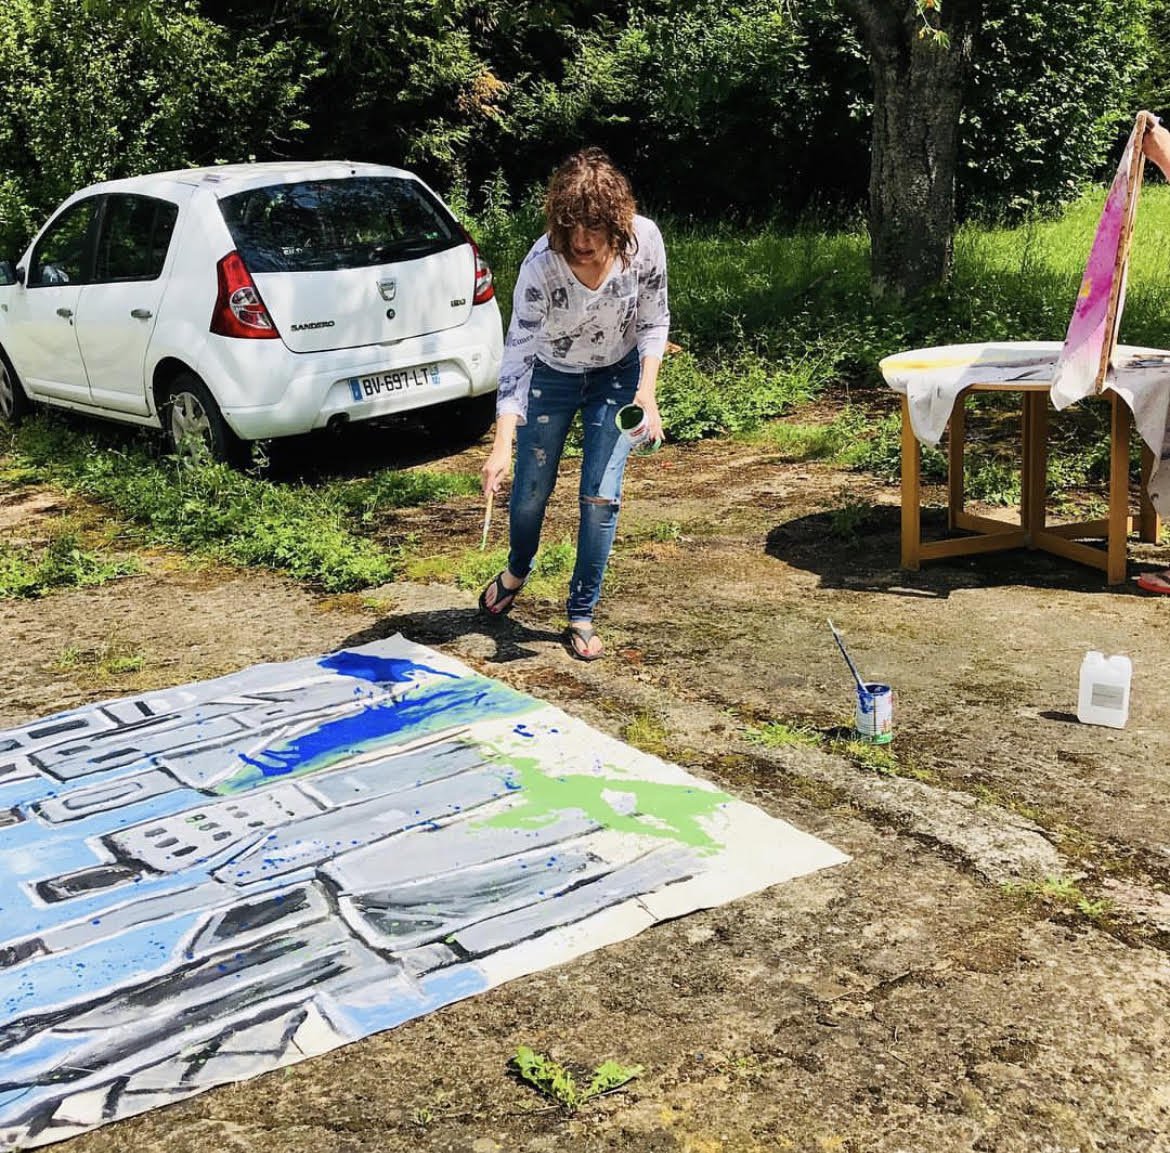 Painting In Action, France, 2018